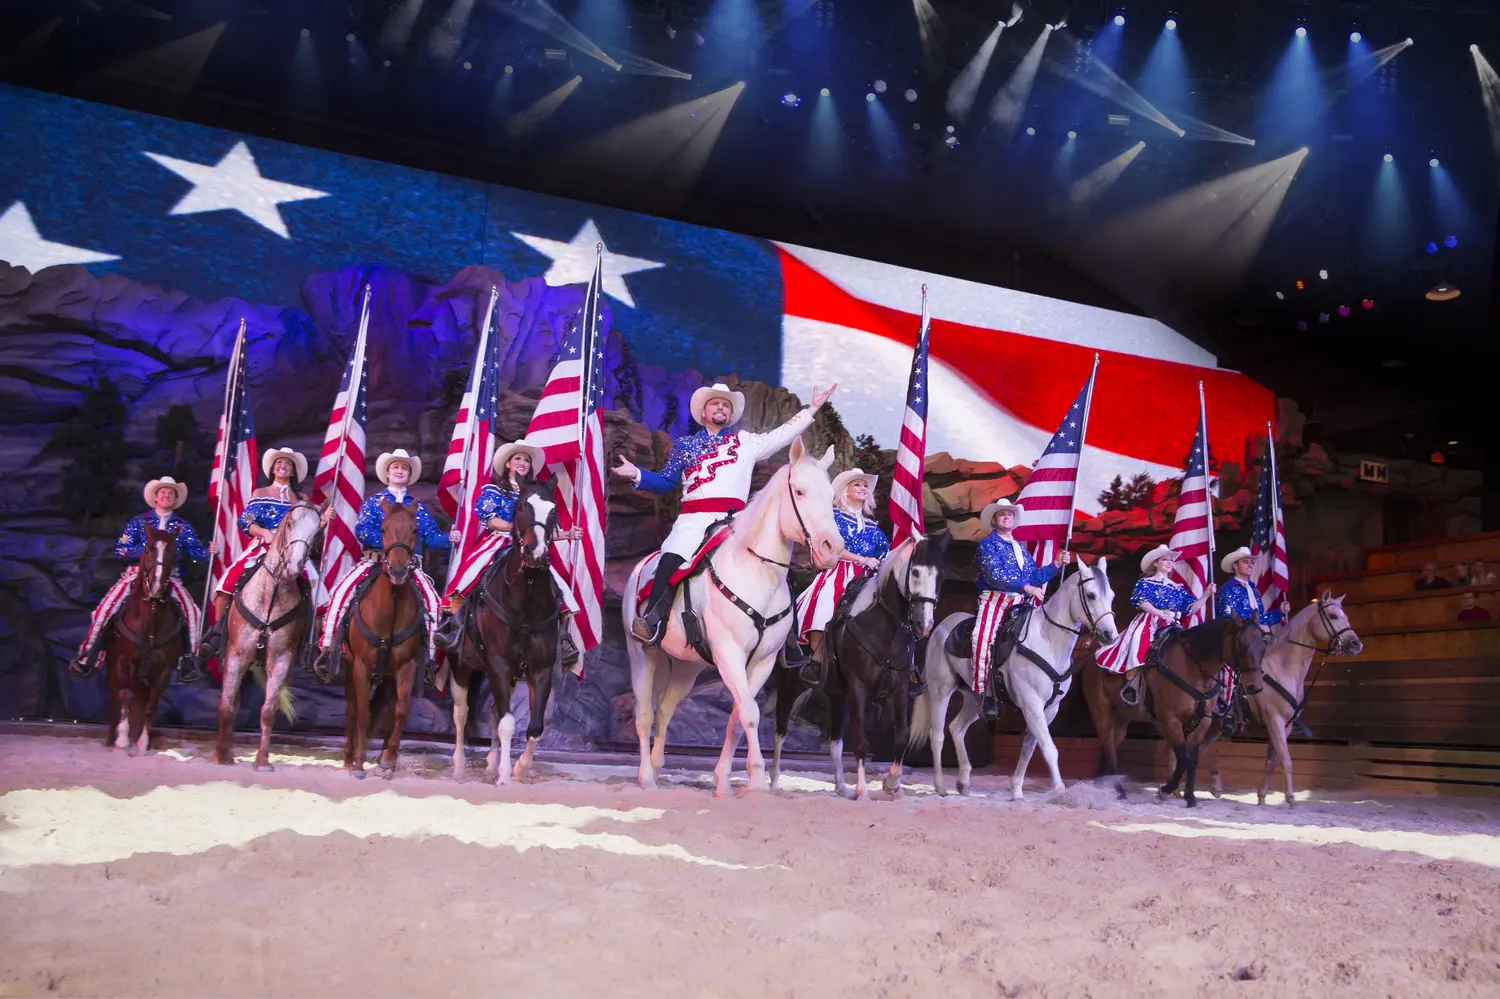 Performers on horses holding the USA flag at the Dolly Parton Stampede show in Branson, MO.